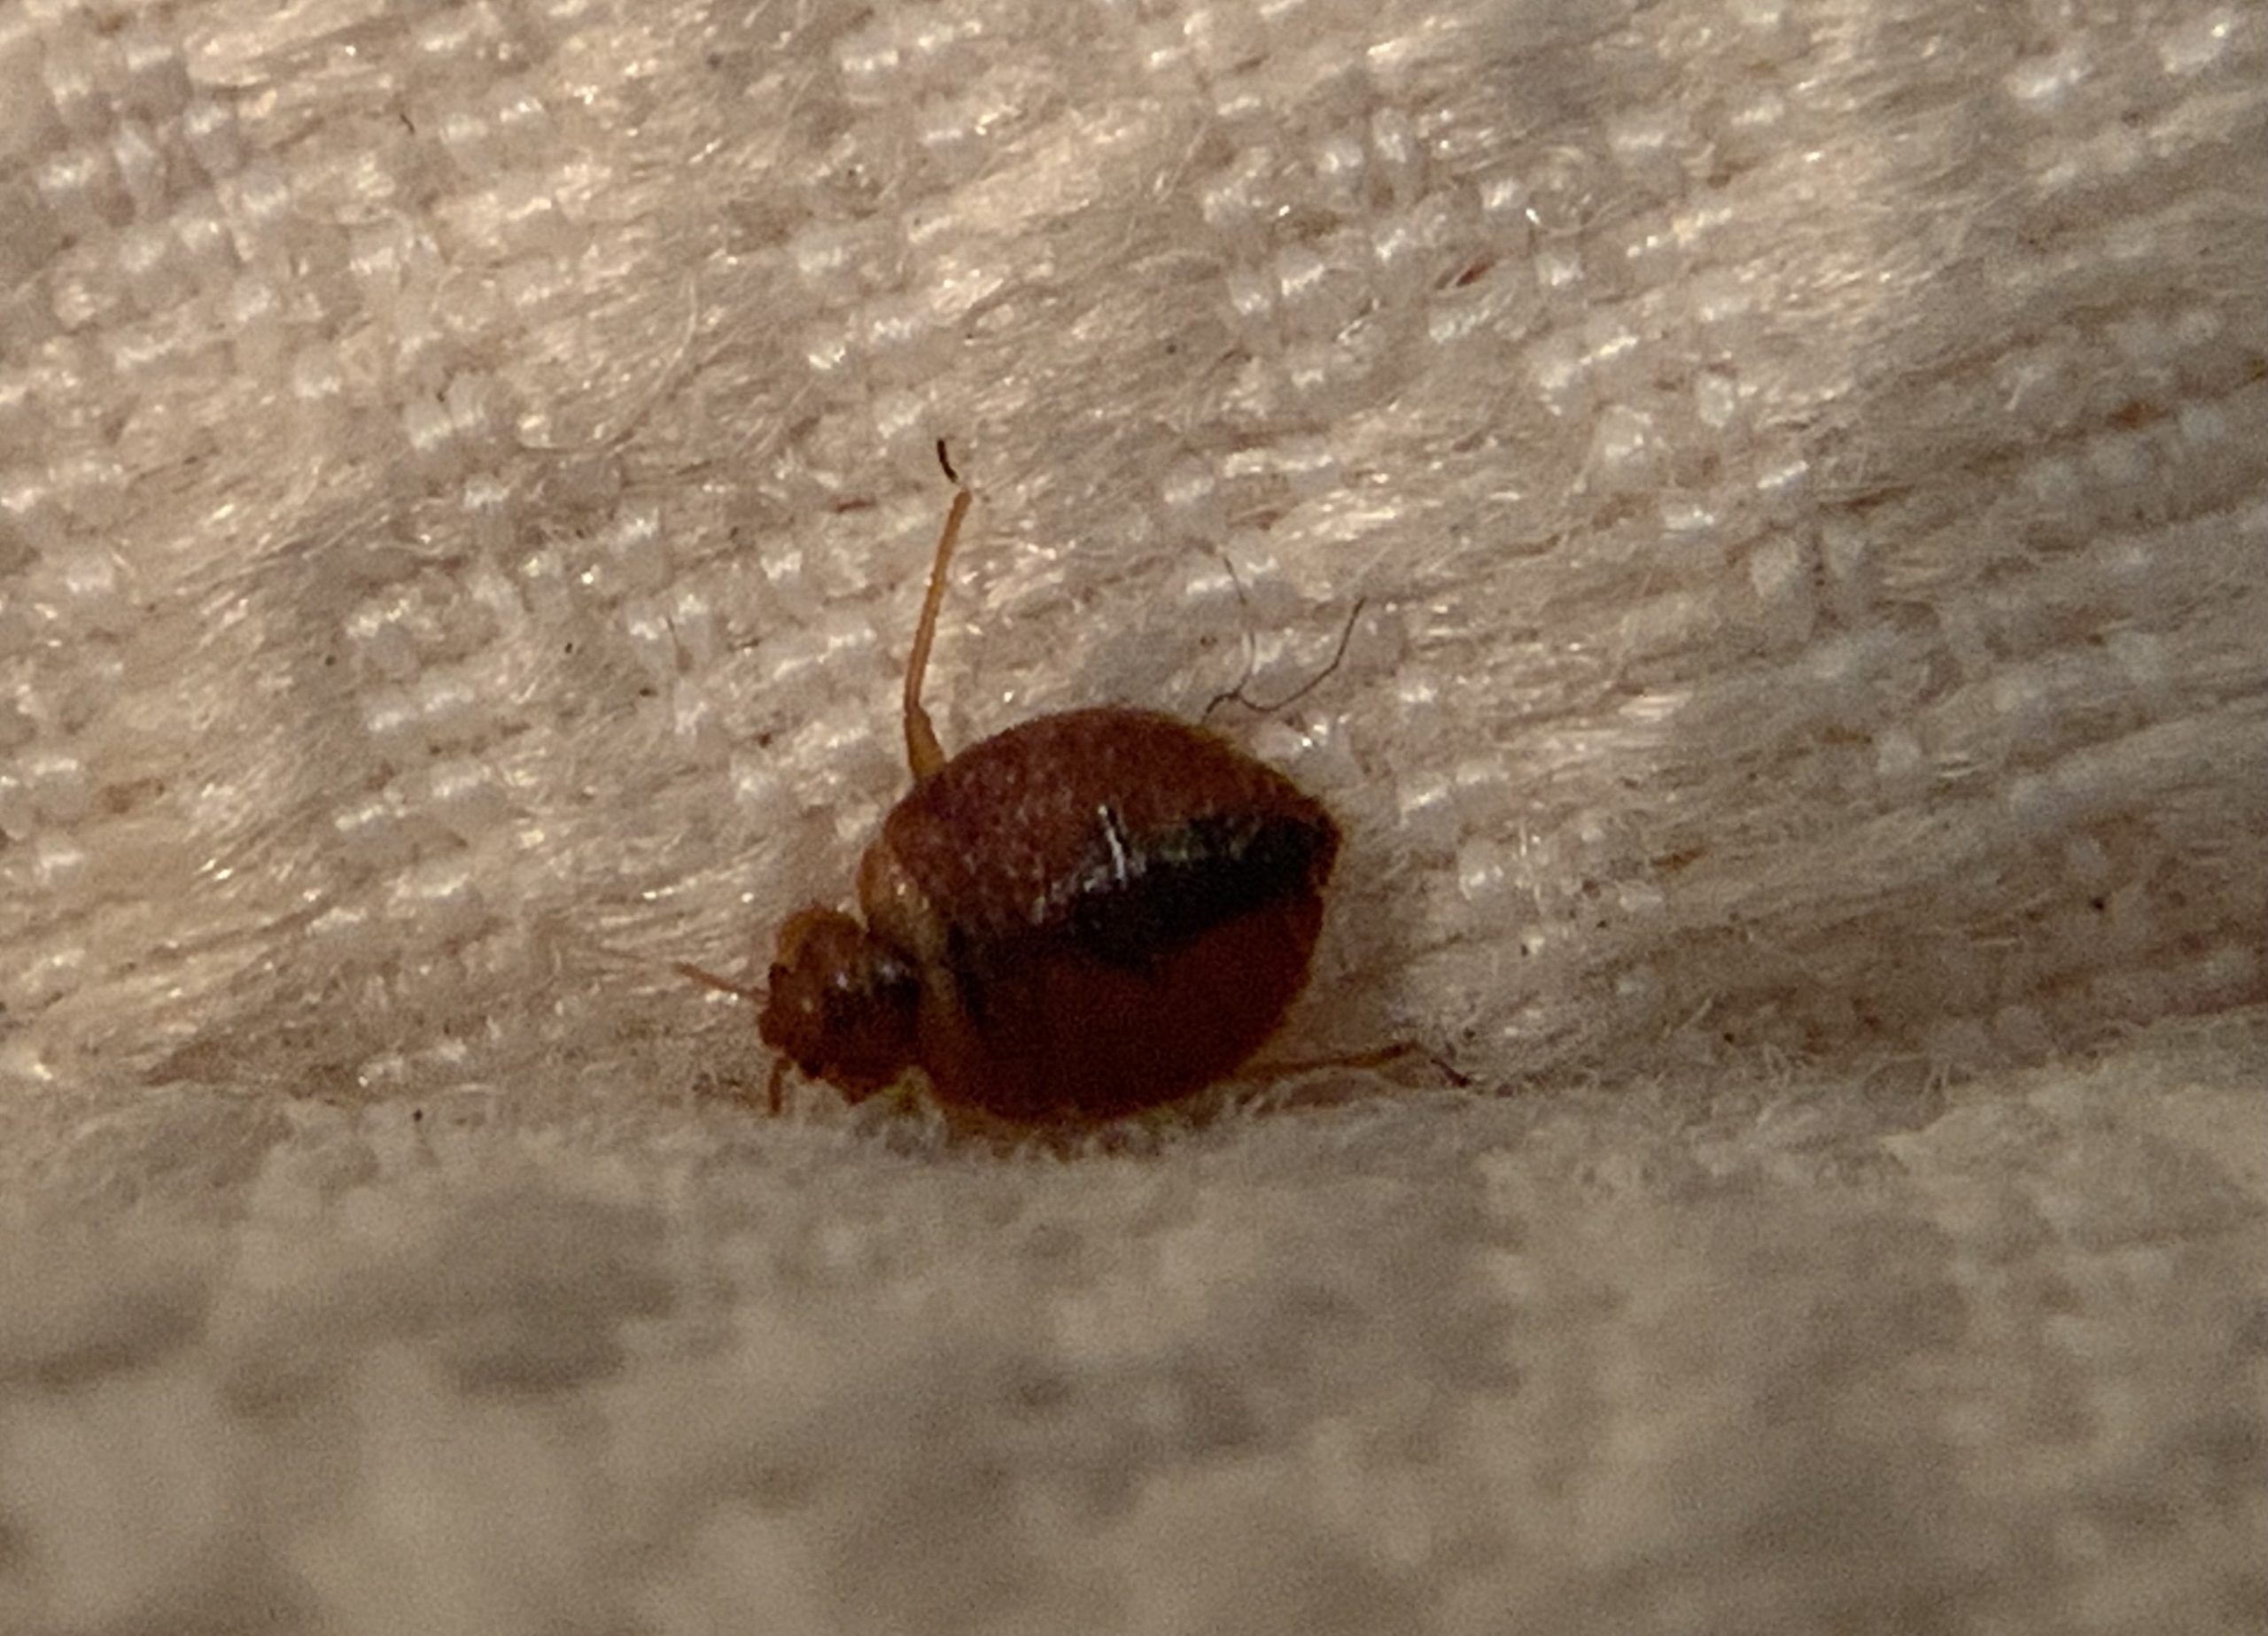 How long can bed bugs live inside a sealed plastic bag?